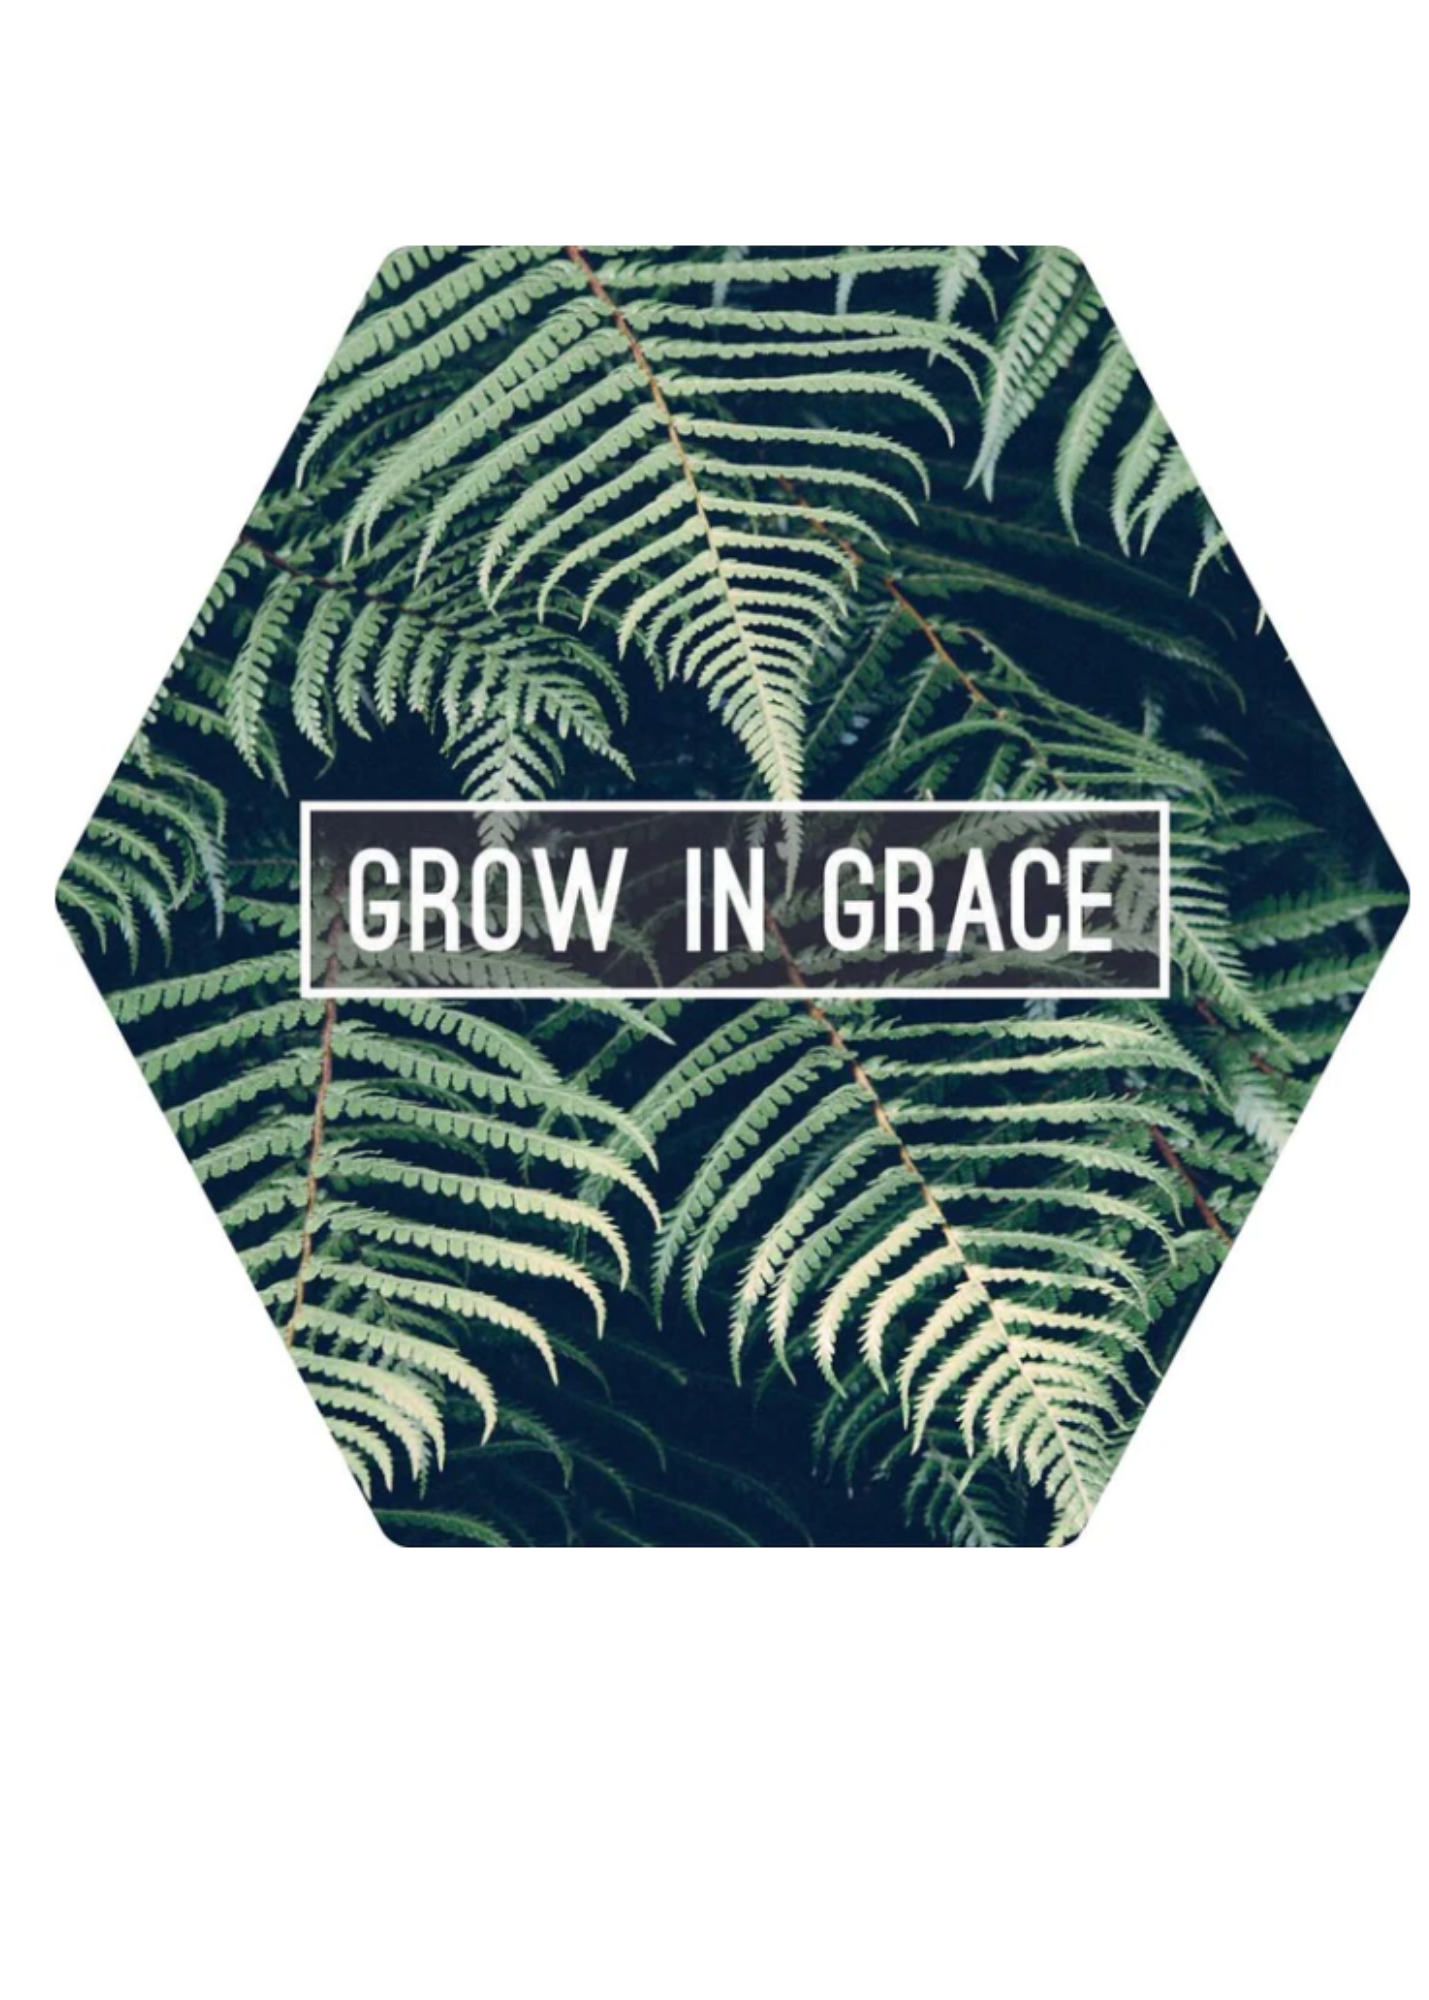 Inspirational Magnets Gifts Grow in Grace